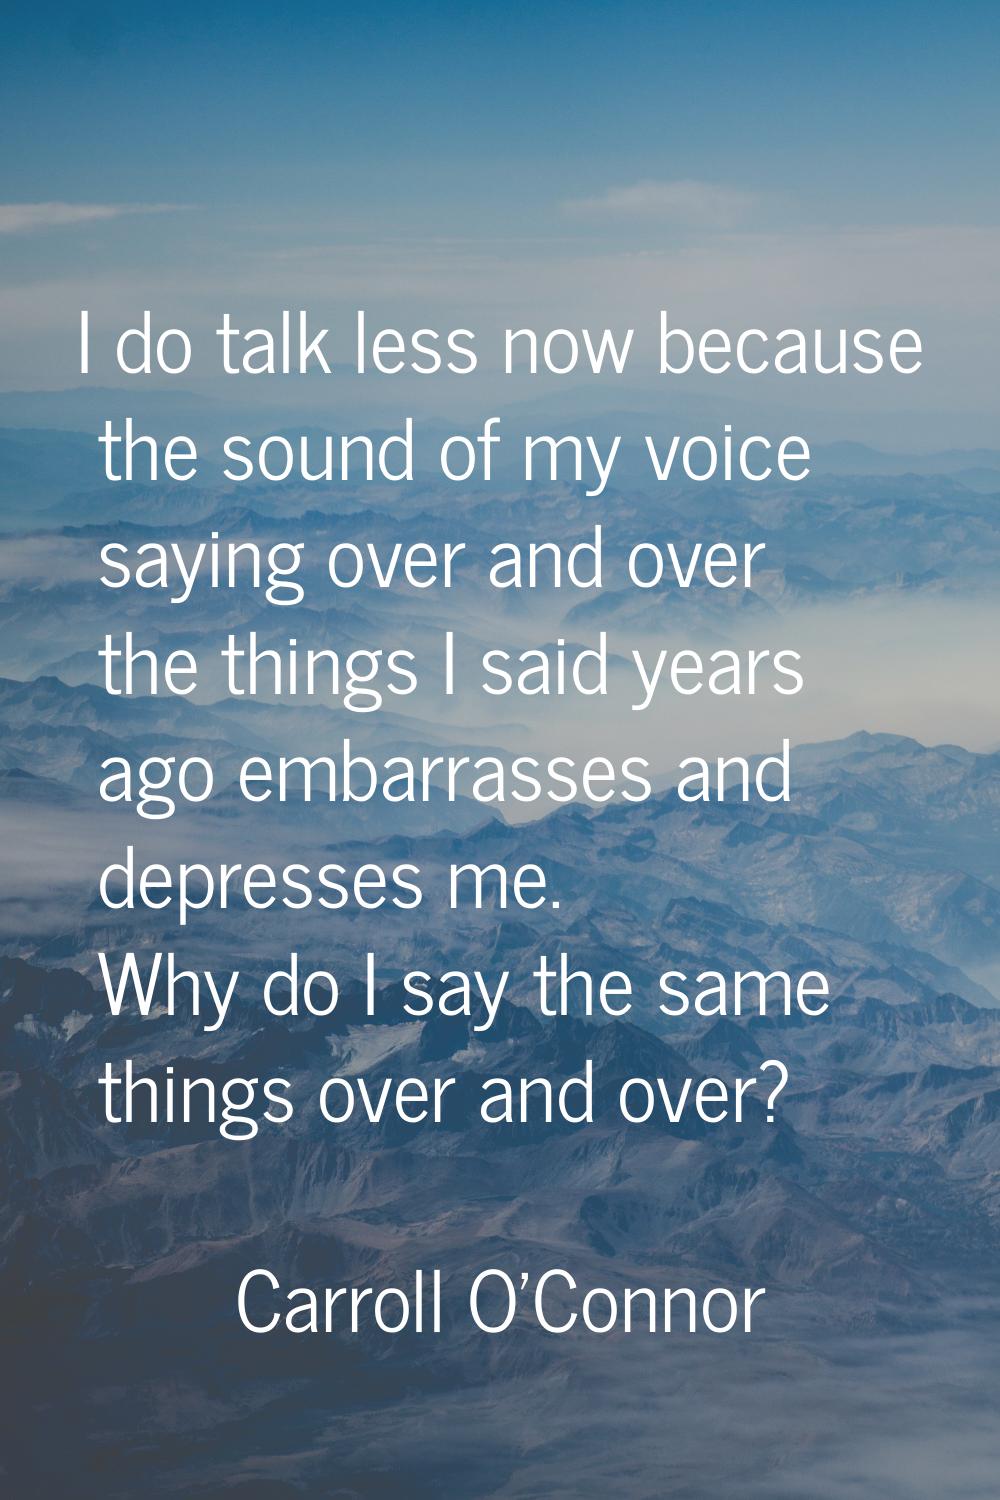 I do talk less now because the sound of my voice saying over and over the things I said years ago e